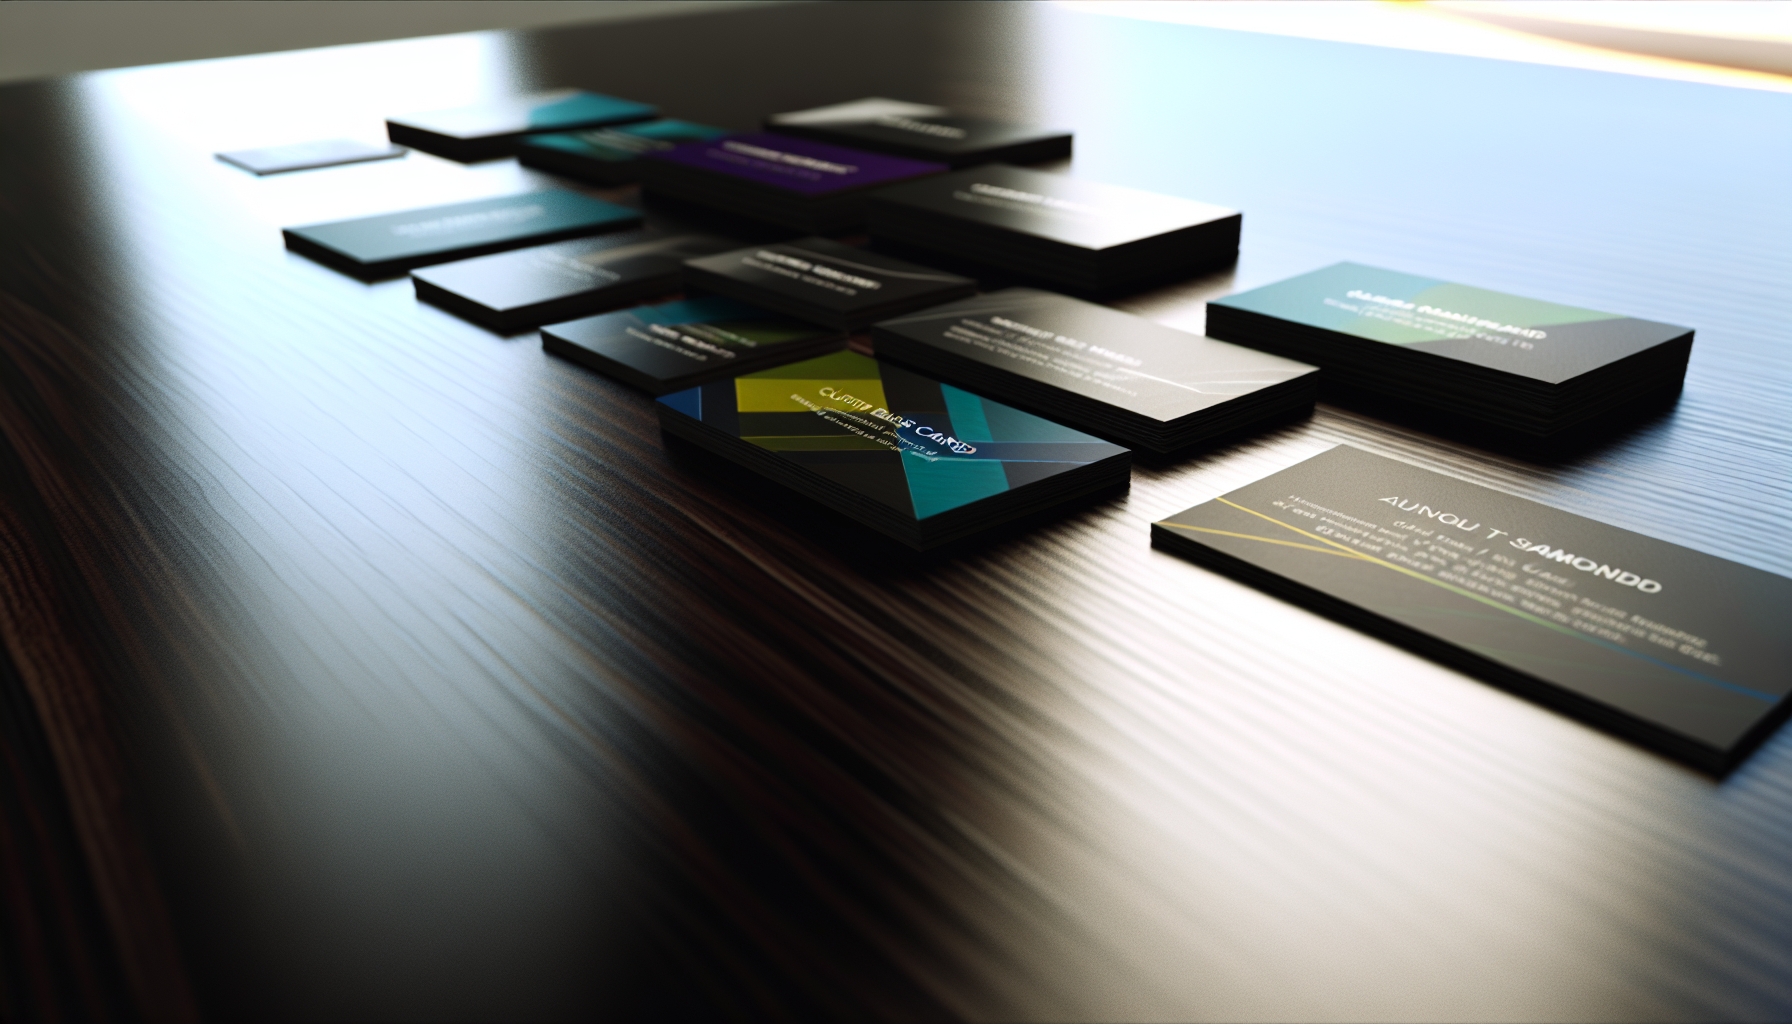 Custom business cards with vibrant colors and modern design